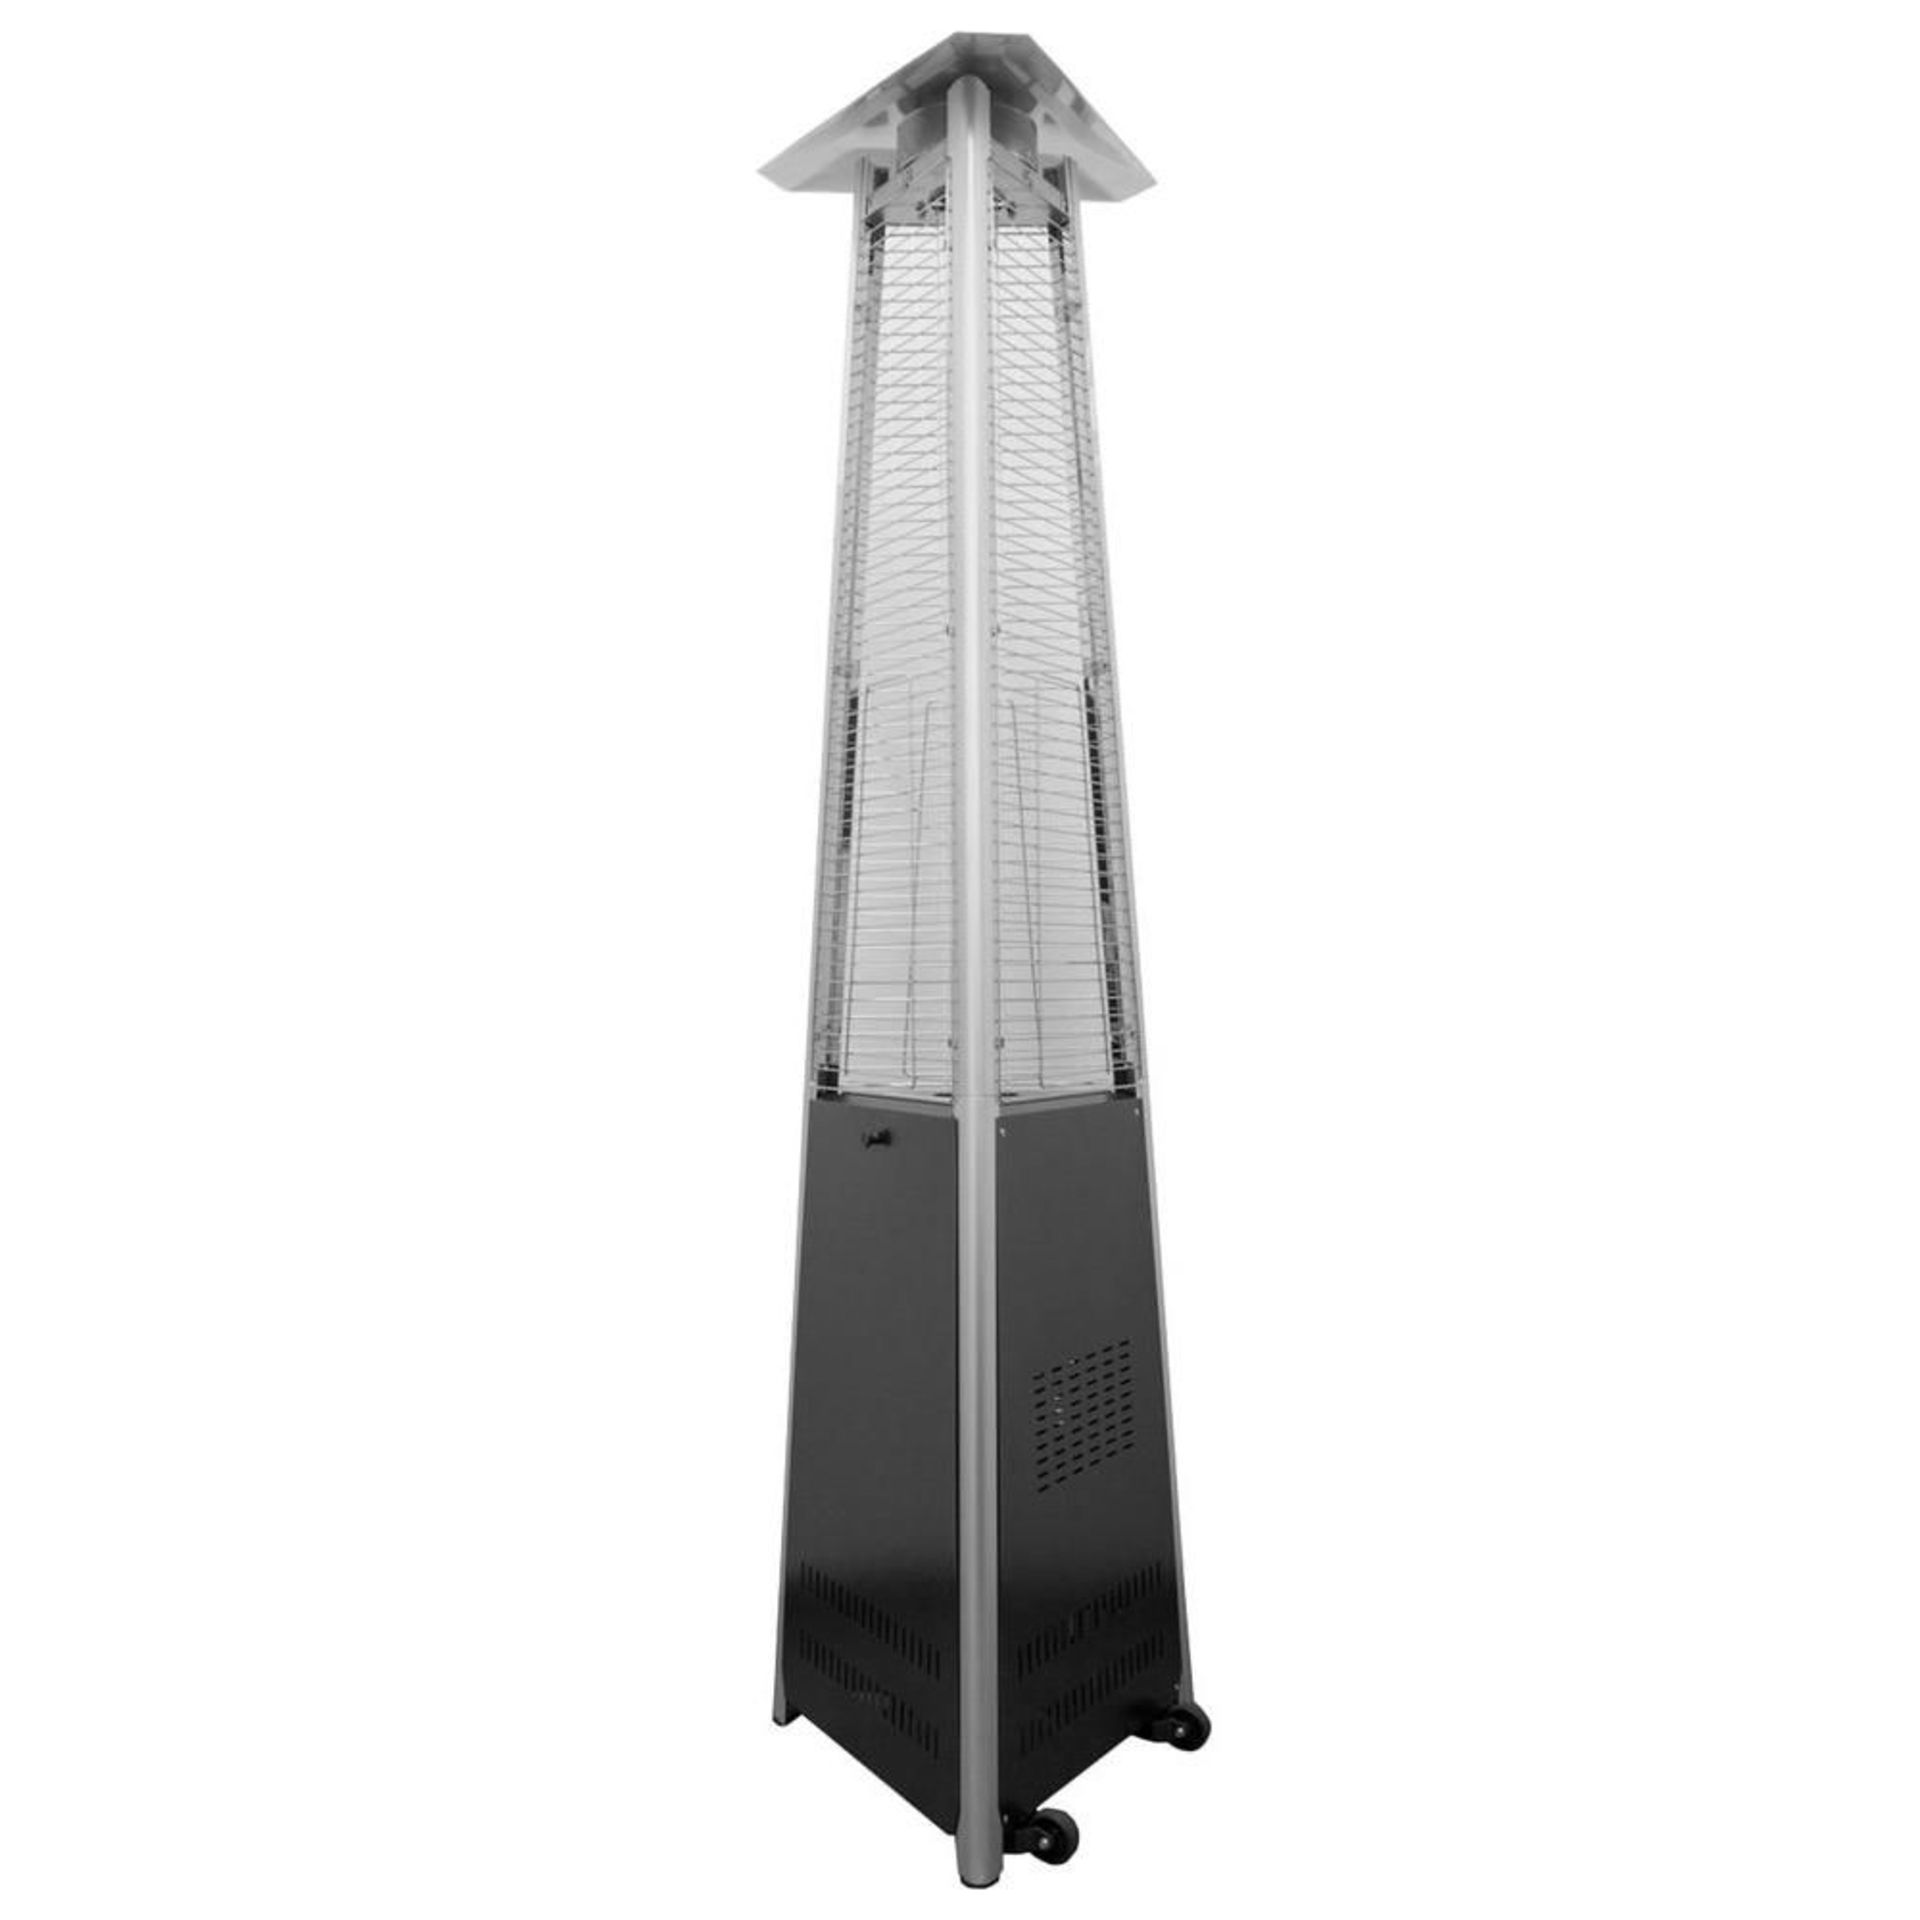 1 HILAND COMMERCIAL PATIO HEATER IN HAMMERED FINISH RRP Â£229.99 (NO GLASS TUBE, GENERIC IMAGE